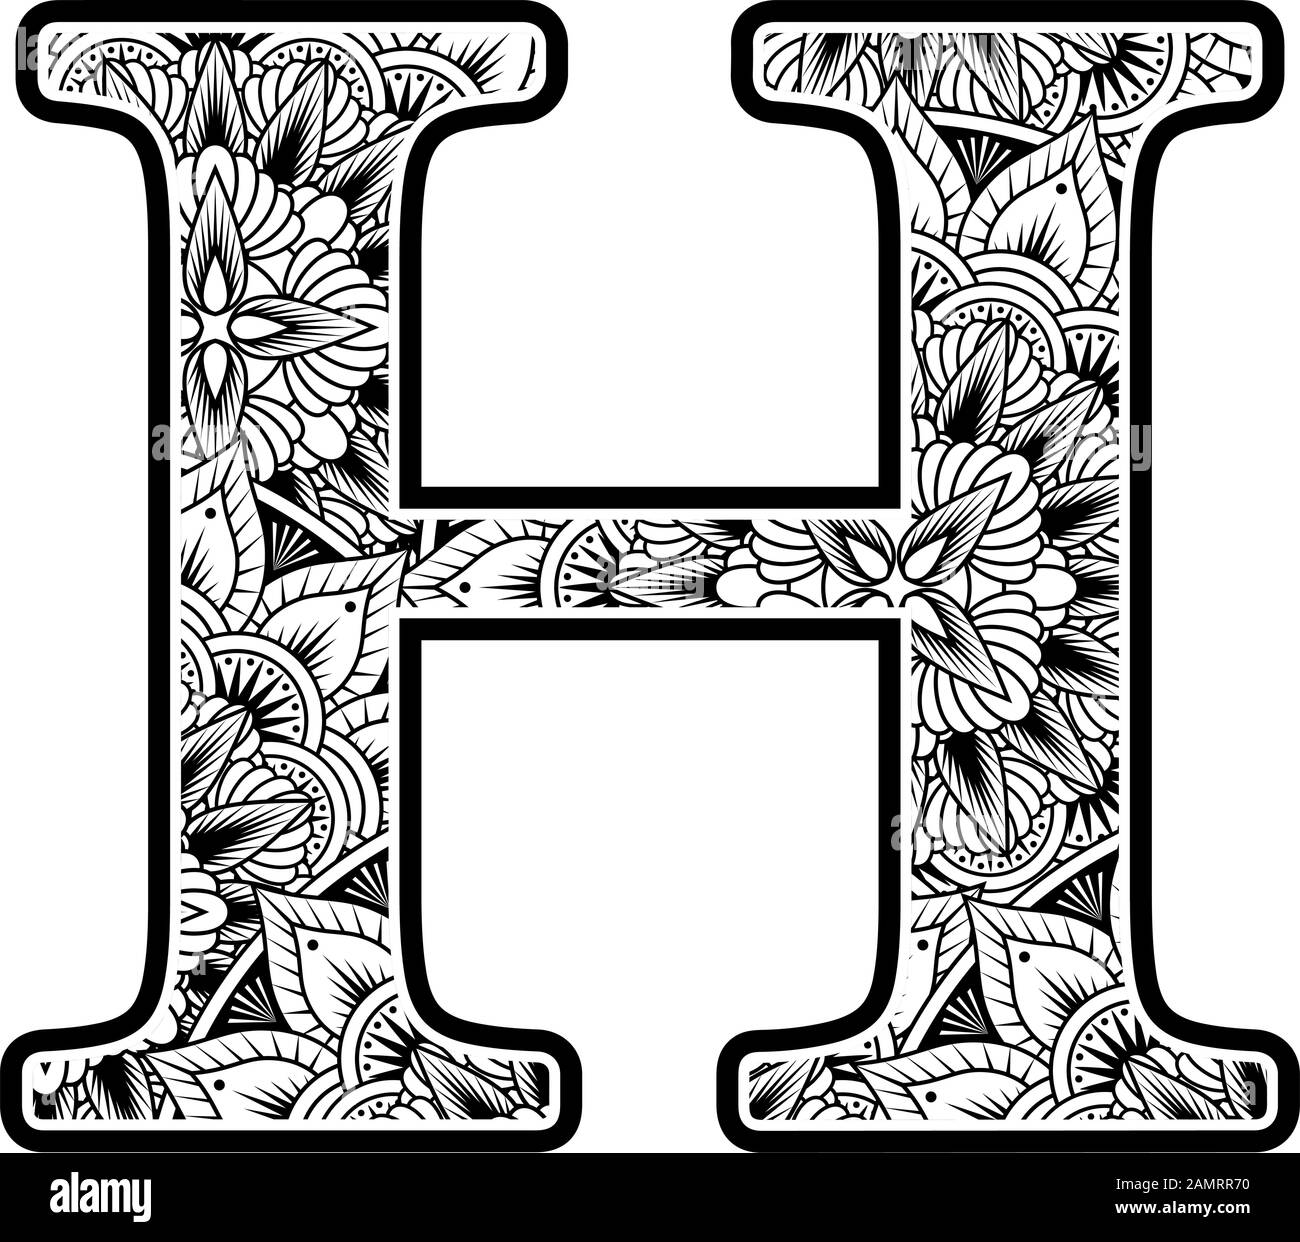 capital letter h with abstract flowers ornaments in black and white. design inspired from mandala art style for coloring. Isolated on white background Stock Vector